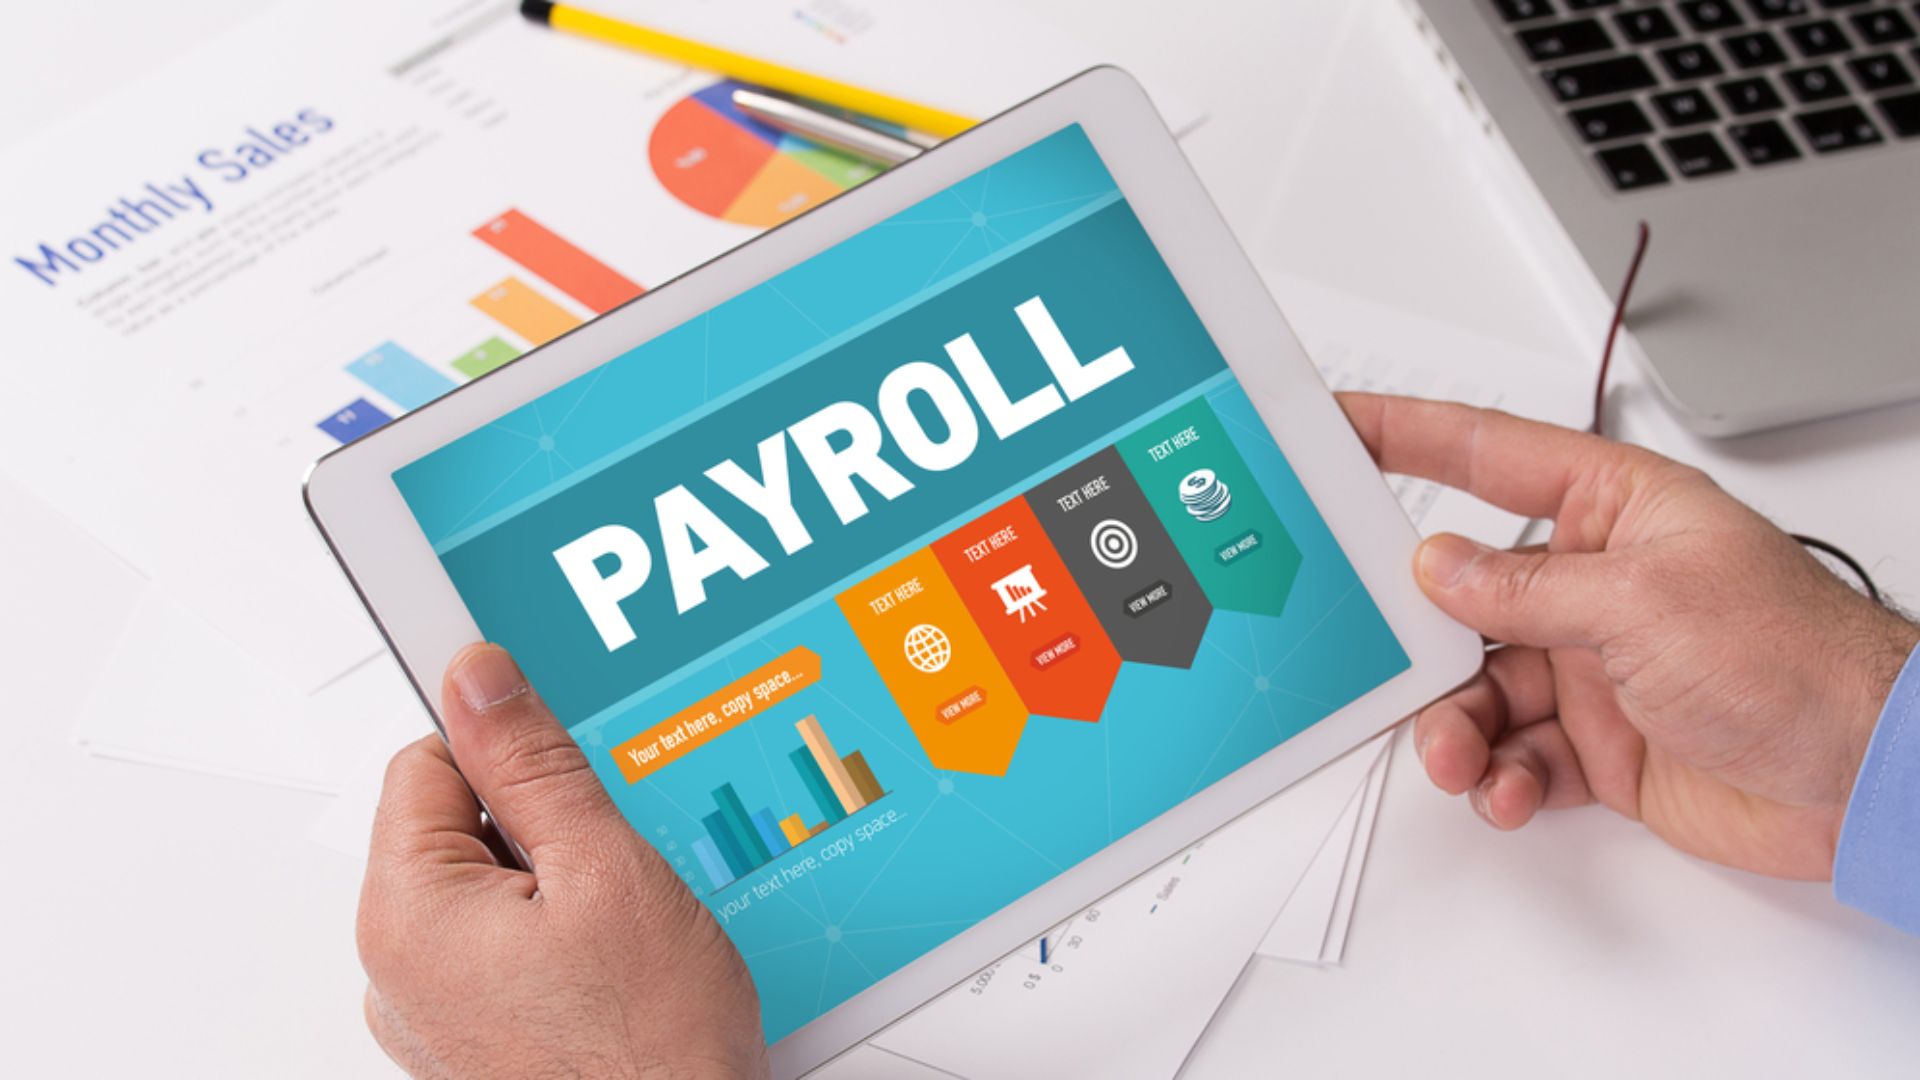 Bеnеfits of Payroll Outsourcing